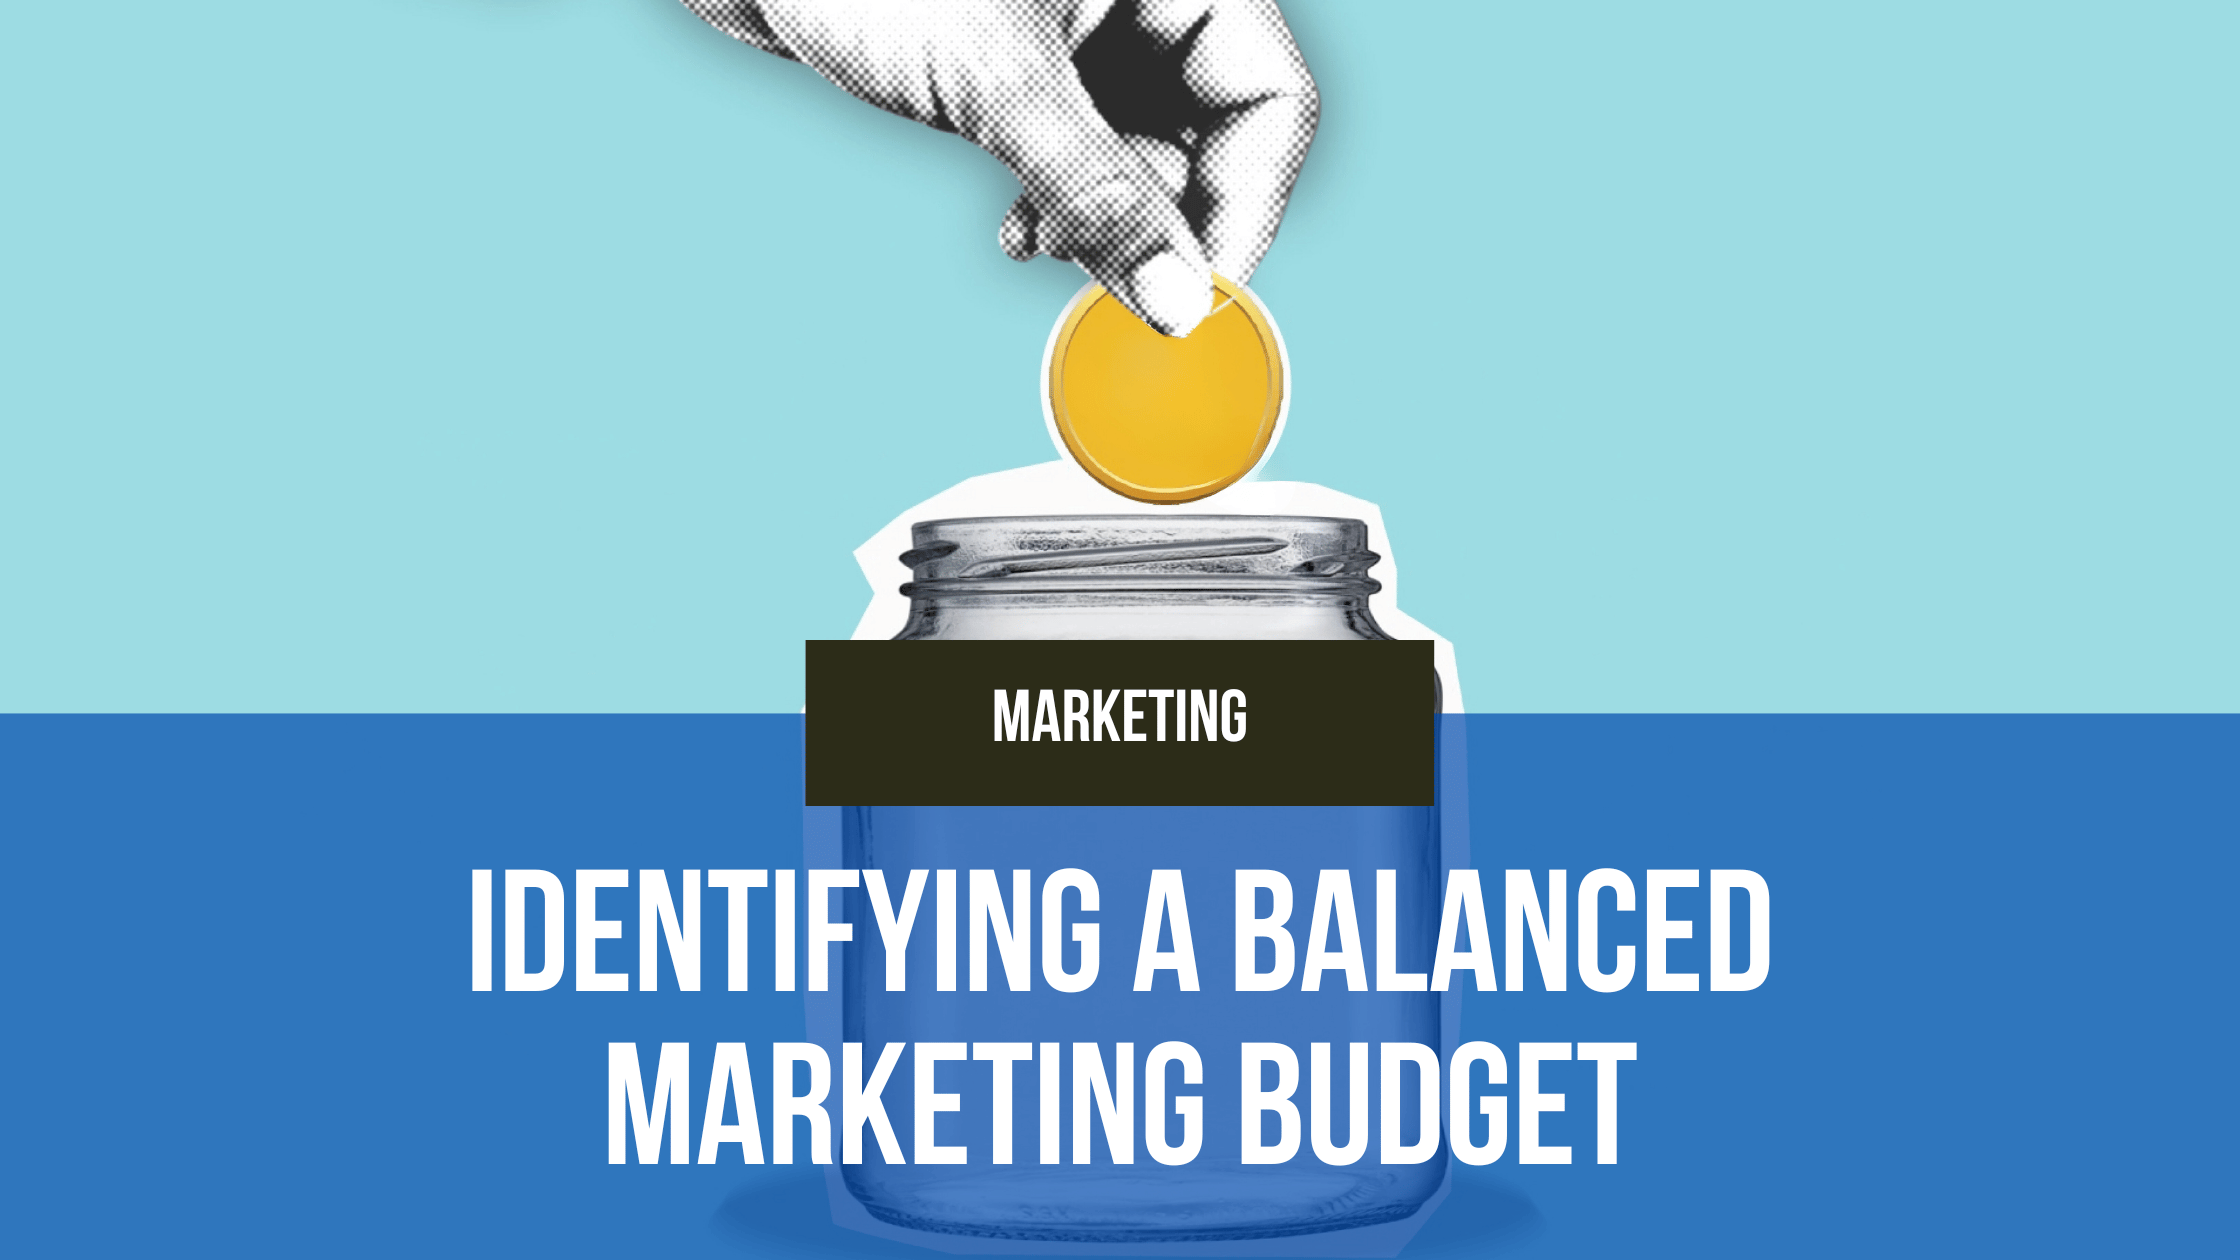 Finding the Sweet Spot: Calculating the Ideal Marketing Budget for Your Small Business